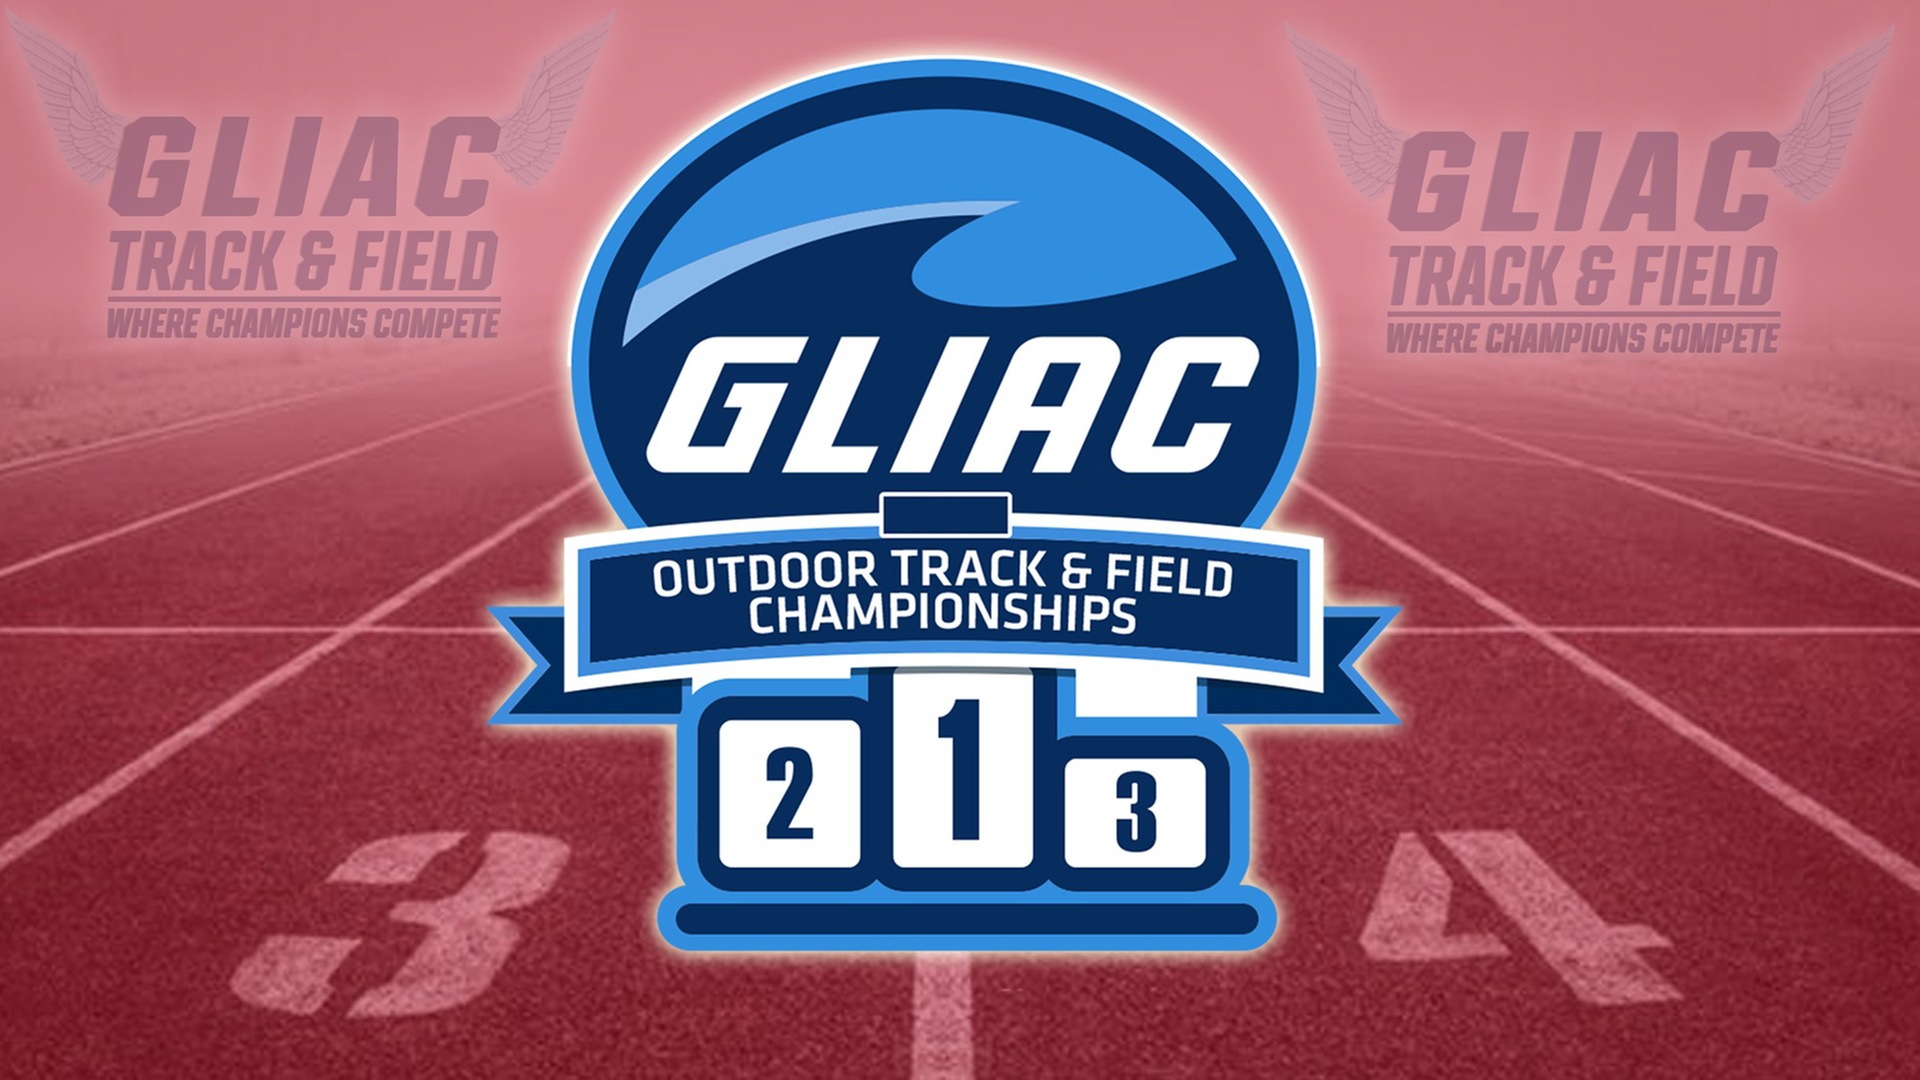 Ferris State Track Teams Gear Up For GLIAC Championships Starting Thursday At Davenport